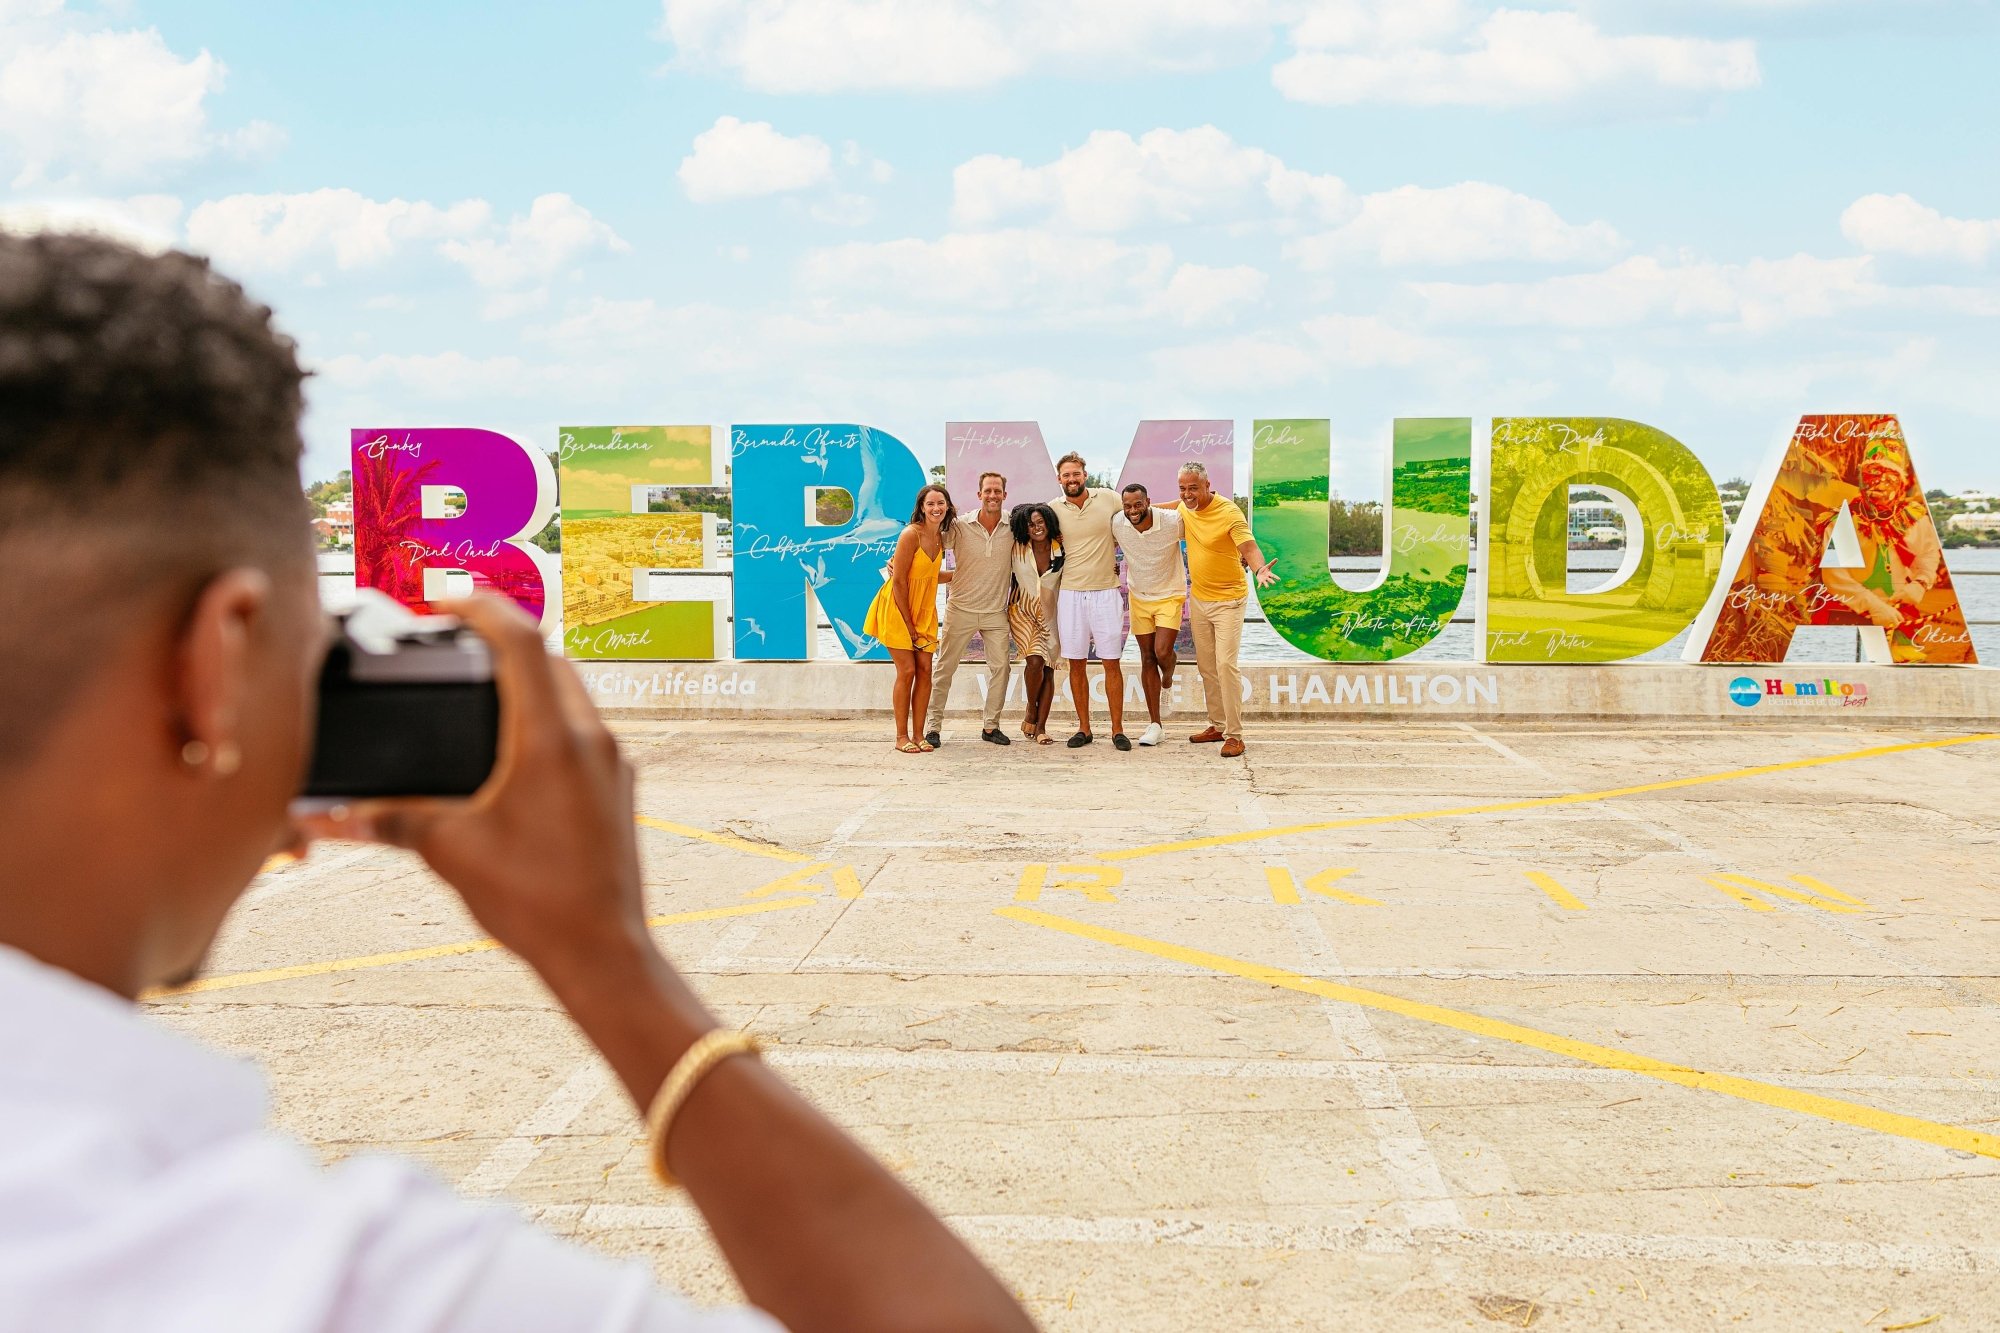 People posing by the Bermuda sign.